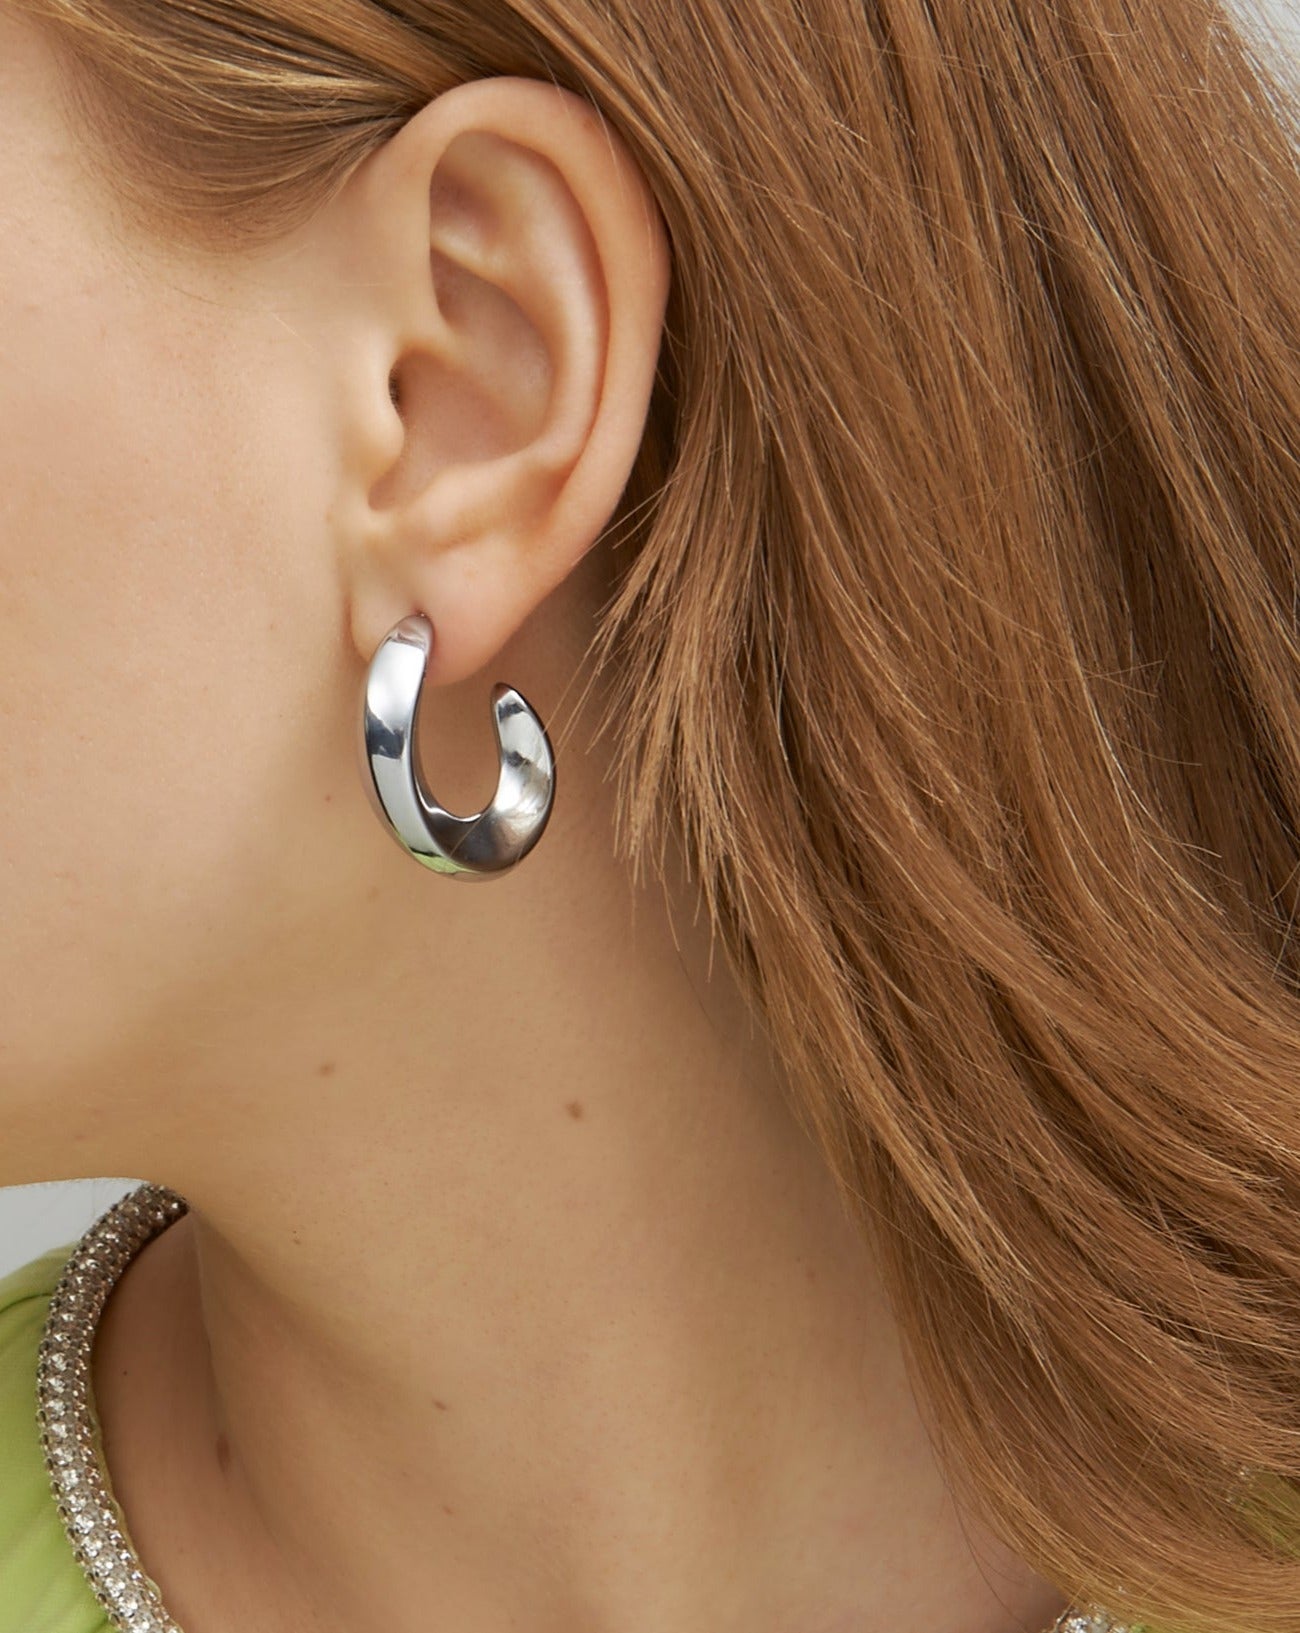 Close-up of a person with light brown hair wearing For Art's Sake® Wave Earrings Silver. The chunky half hoop design is thick and slightly curved, and the person sports a light green top with a silver collar. The focus is on the ear, earring, and a portion of the hair and clothing.